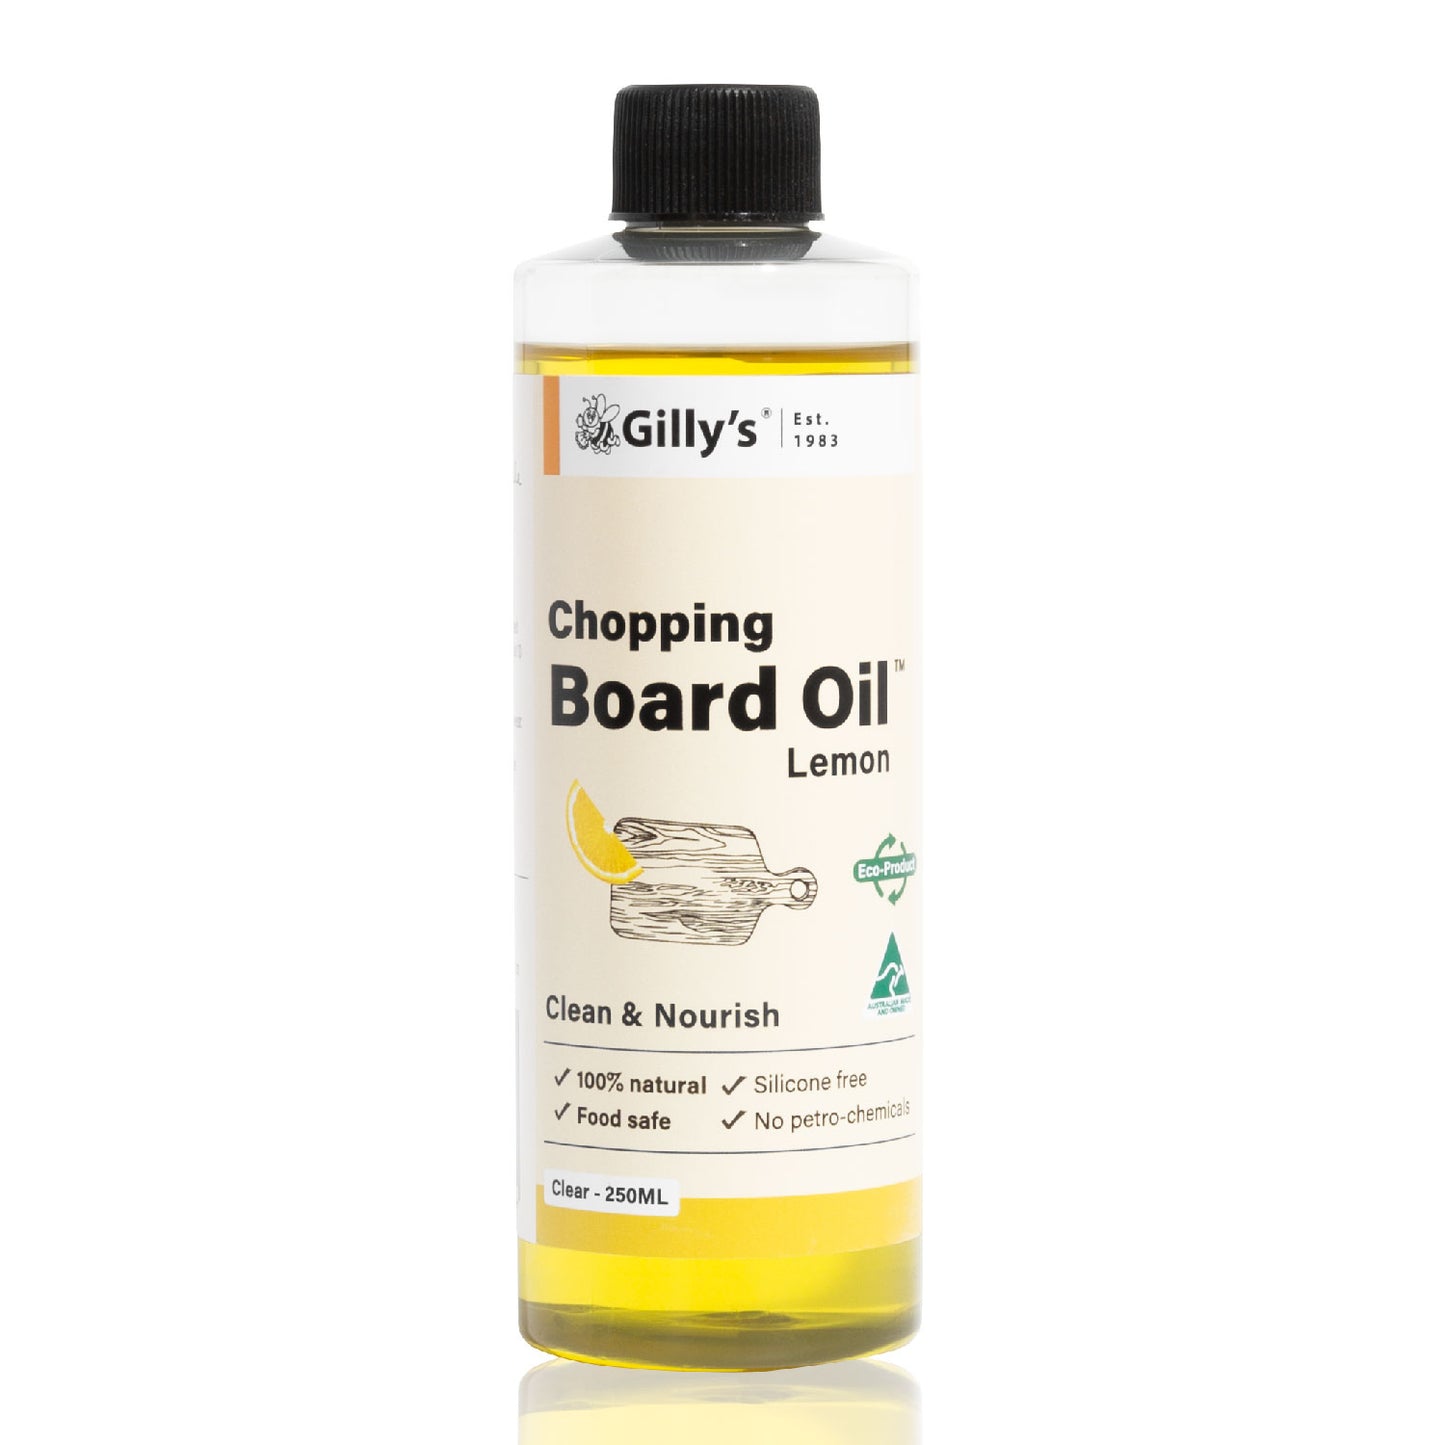 Load image into Gallery viewer, Chopping Board Oil Lemon 250ml / 1L
